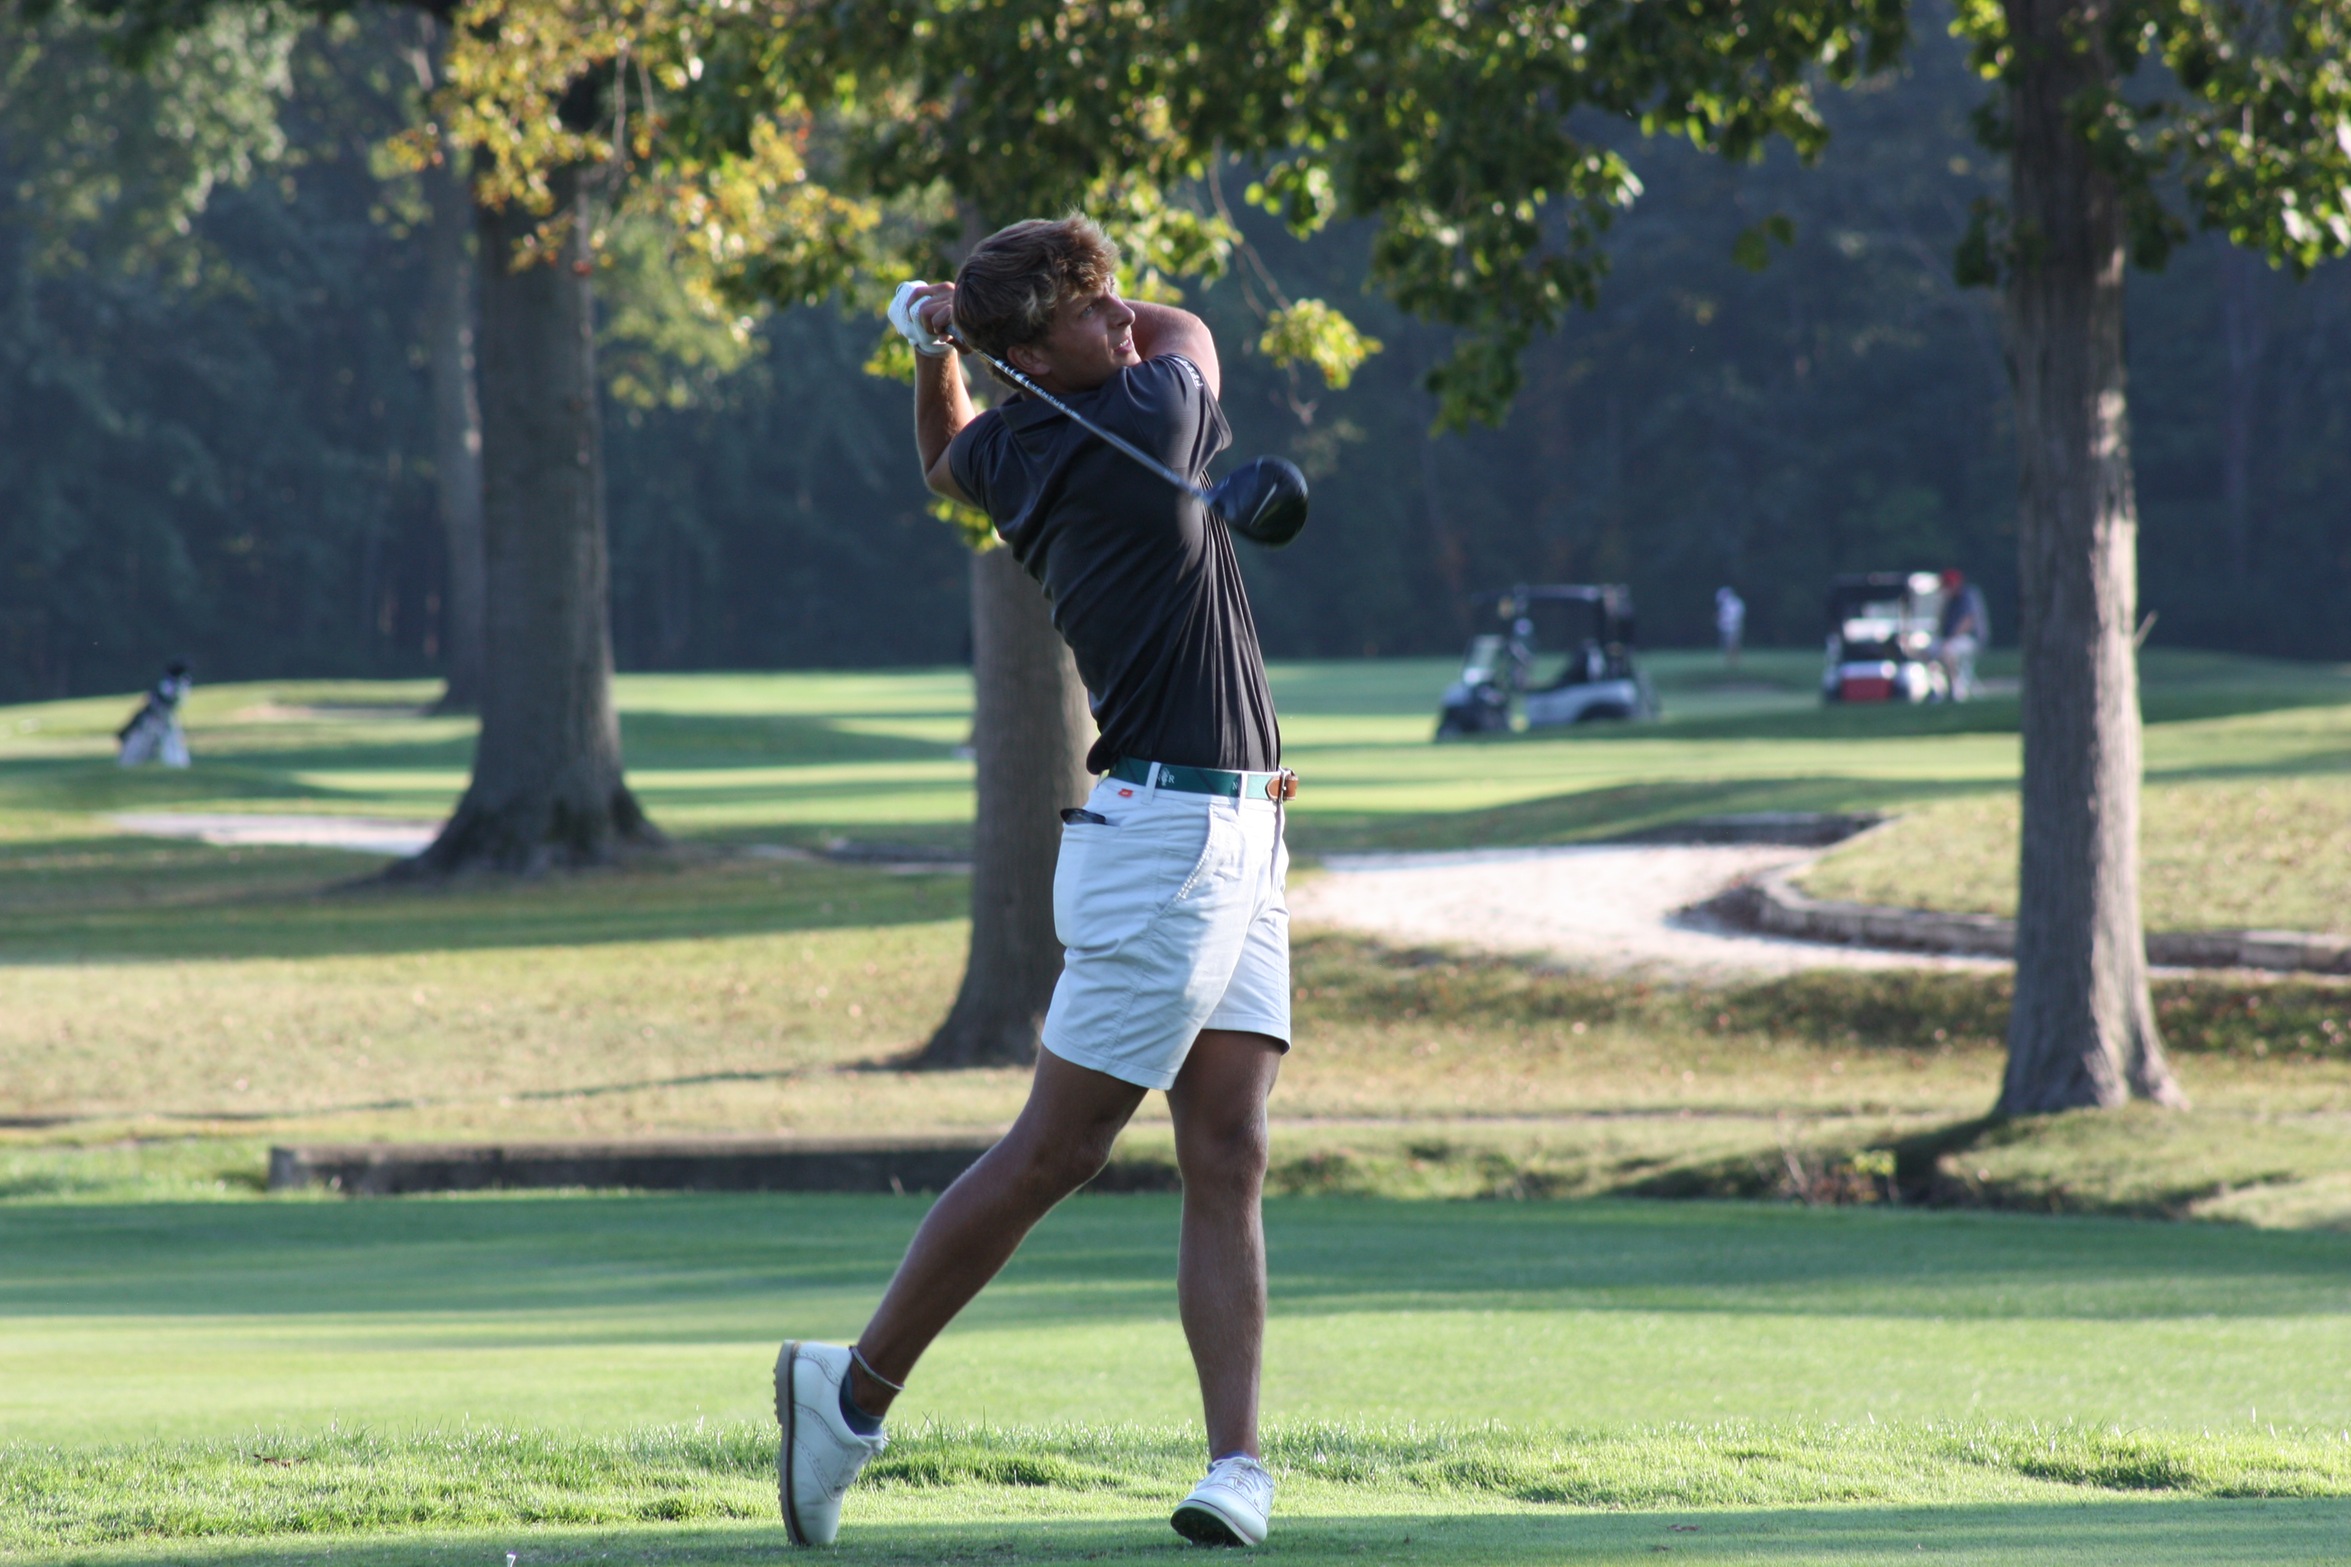 Simms in Top-10, Cleveland State Men’s Golf Seventh after Day One of Tom Tontimonia Invitational